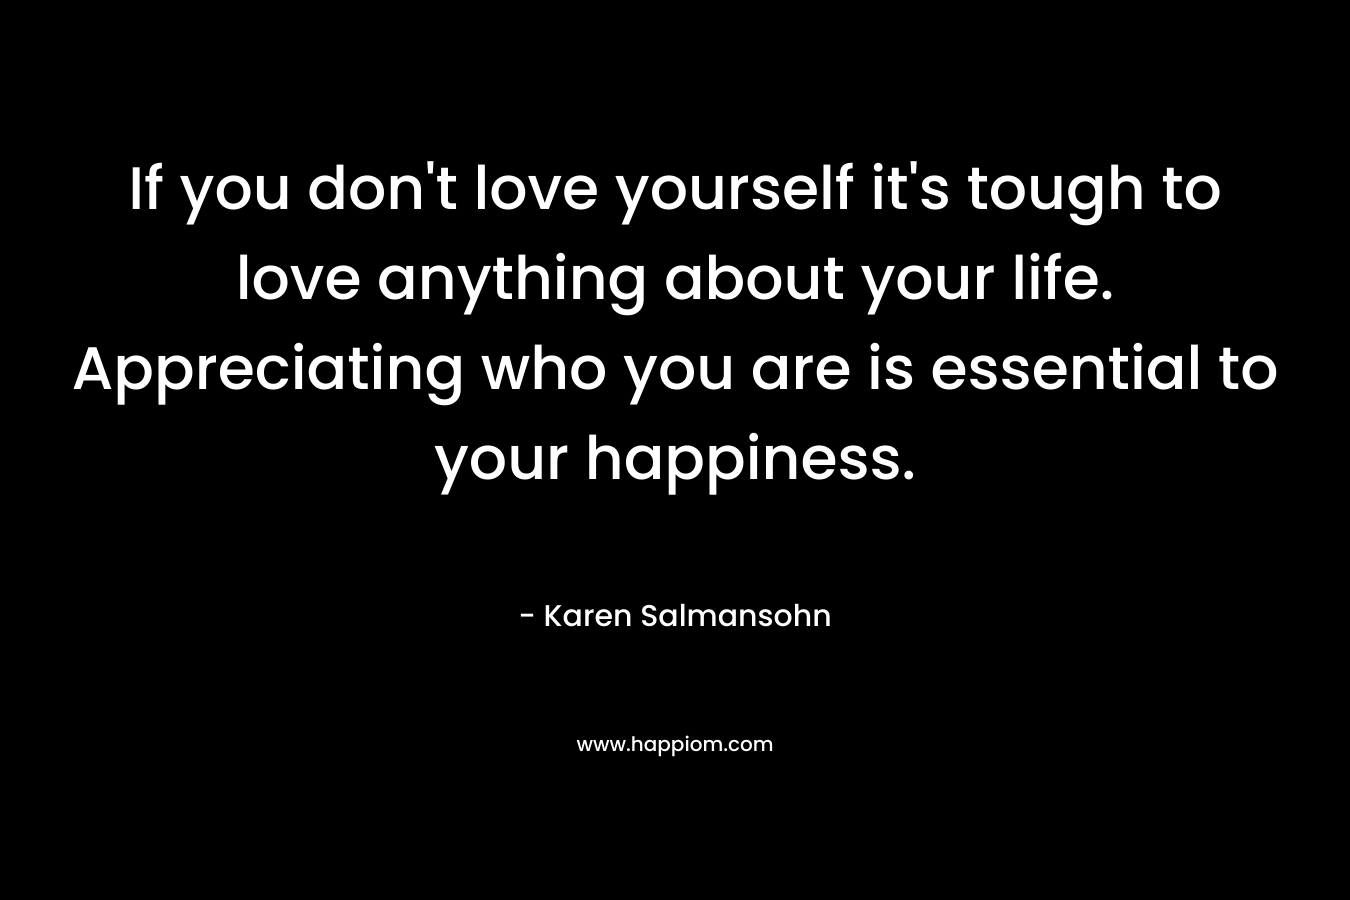 If you don't love yourself it's tough to love anything about your life. Appreciating who you are is essential to your happiness.